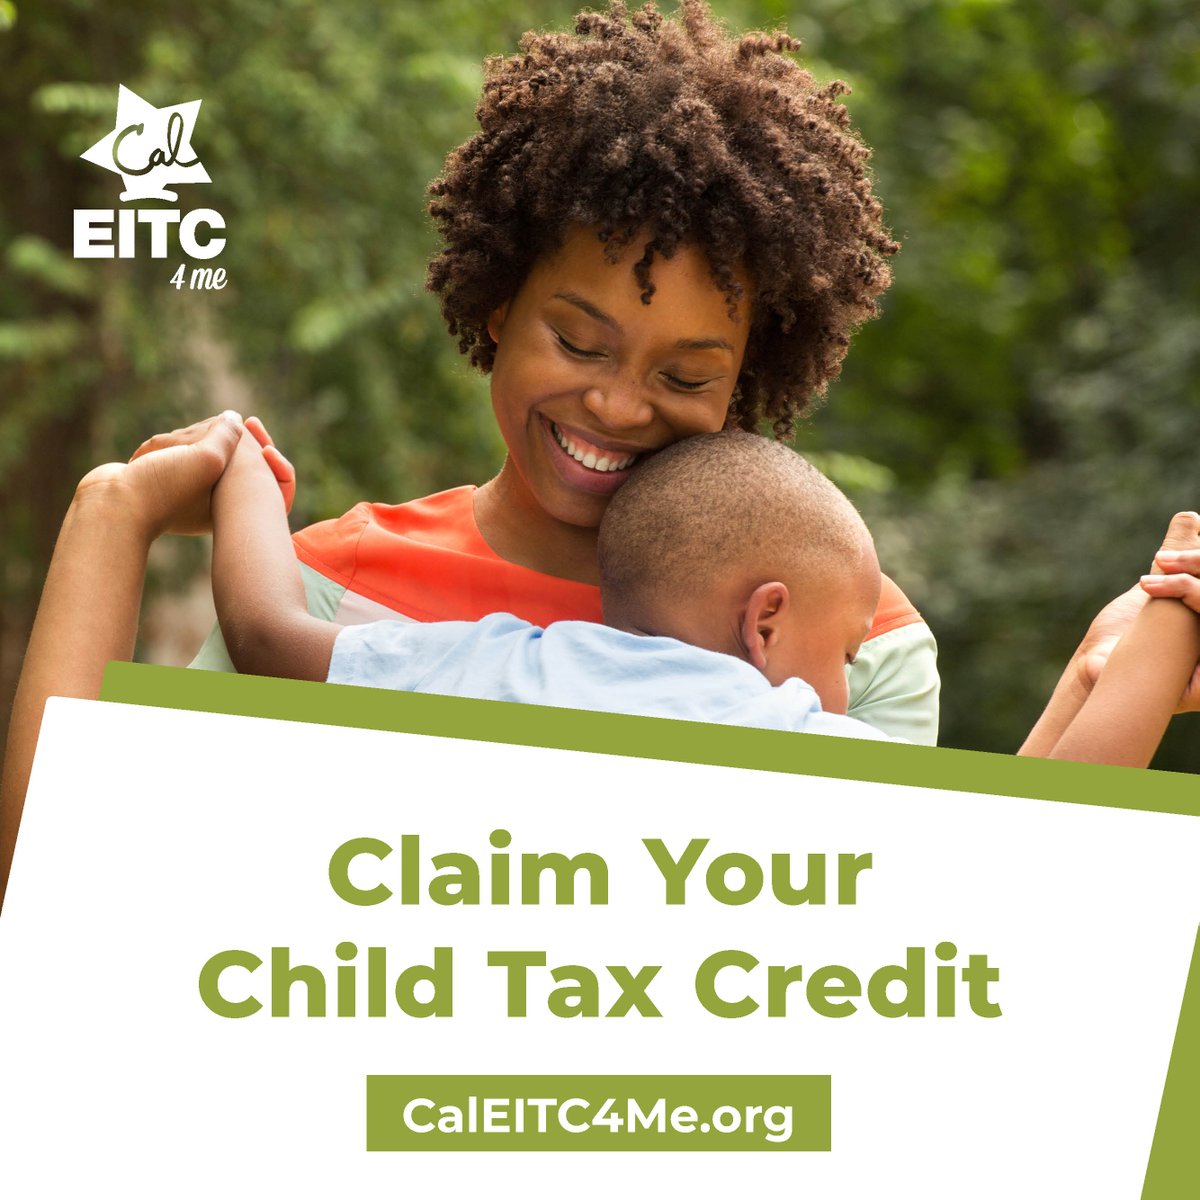 Did you receive the #ChildTaxCredit this year? In January, the IRS will mail you Letter 6419 so you can report the exact amount received on your 2023 tax return. Be sure to keep it when you file.

#CalEITC4Me #Assuaged #students #studentinterns #taxcredit #taxfile #Californiatax